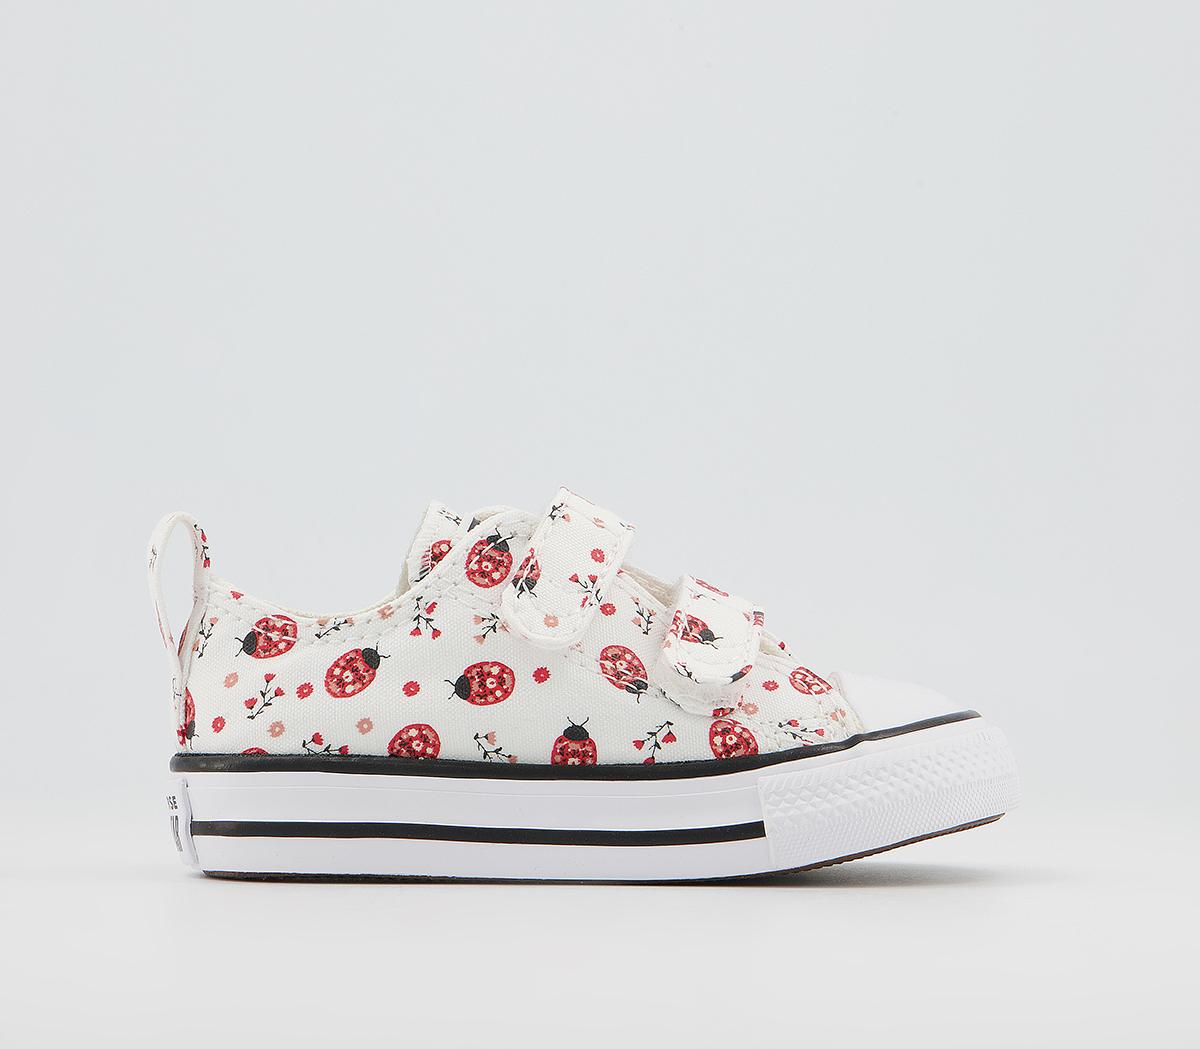 ConverseAll Star 2vlace TrainersWhite Red Black Flowery Bugs